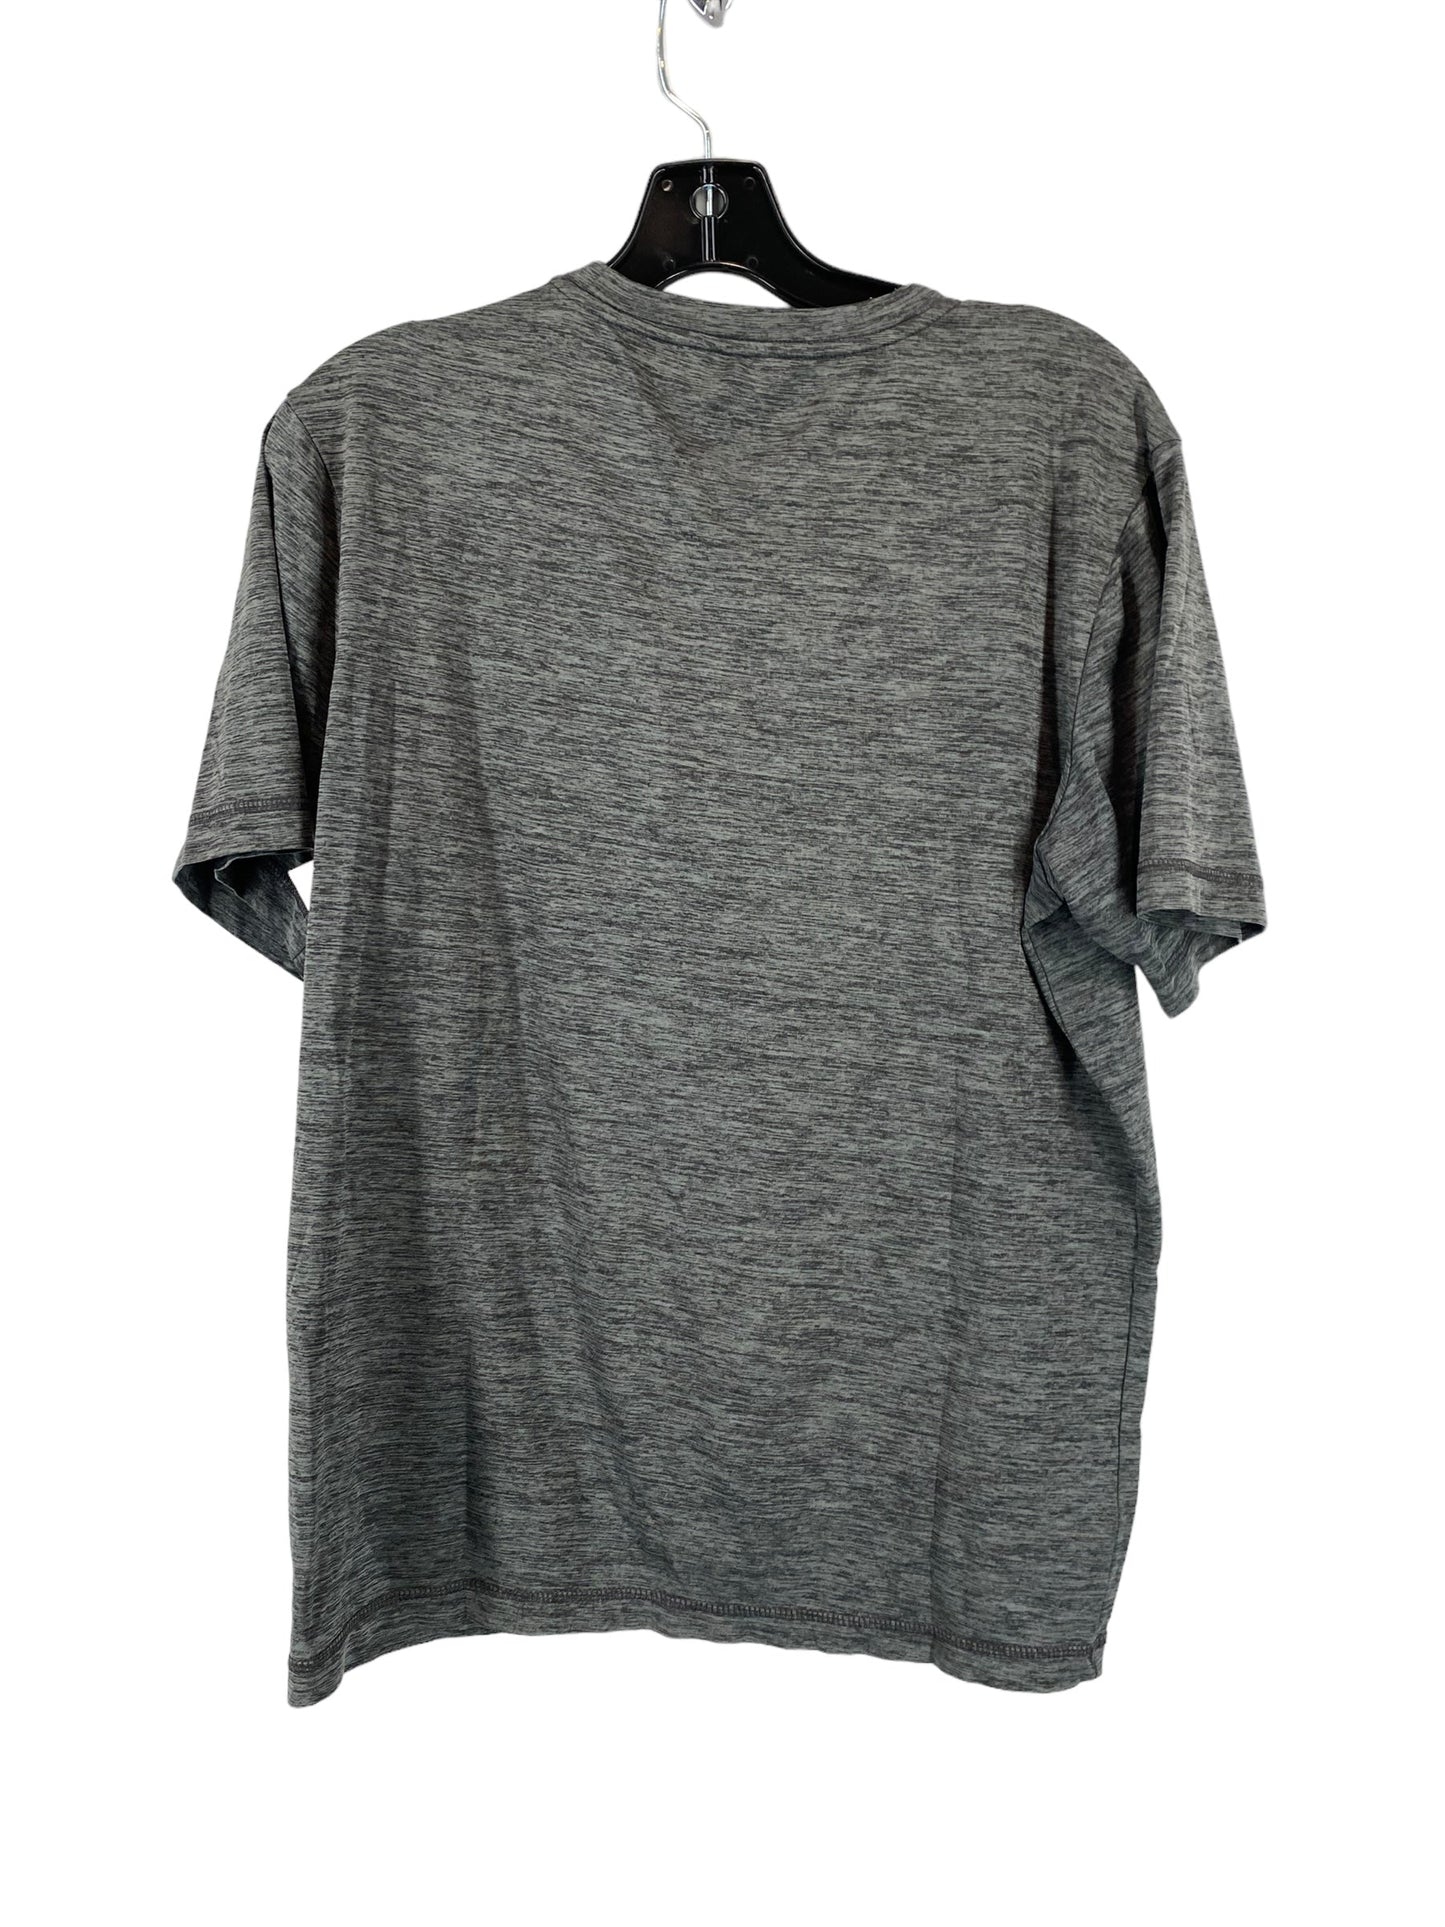 Grey Top Short Sleeve Majestic, Size M